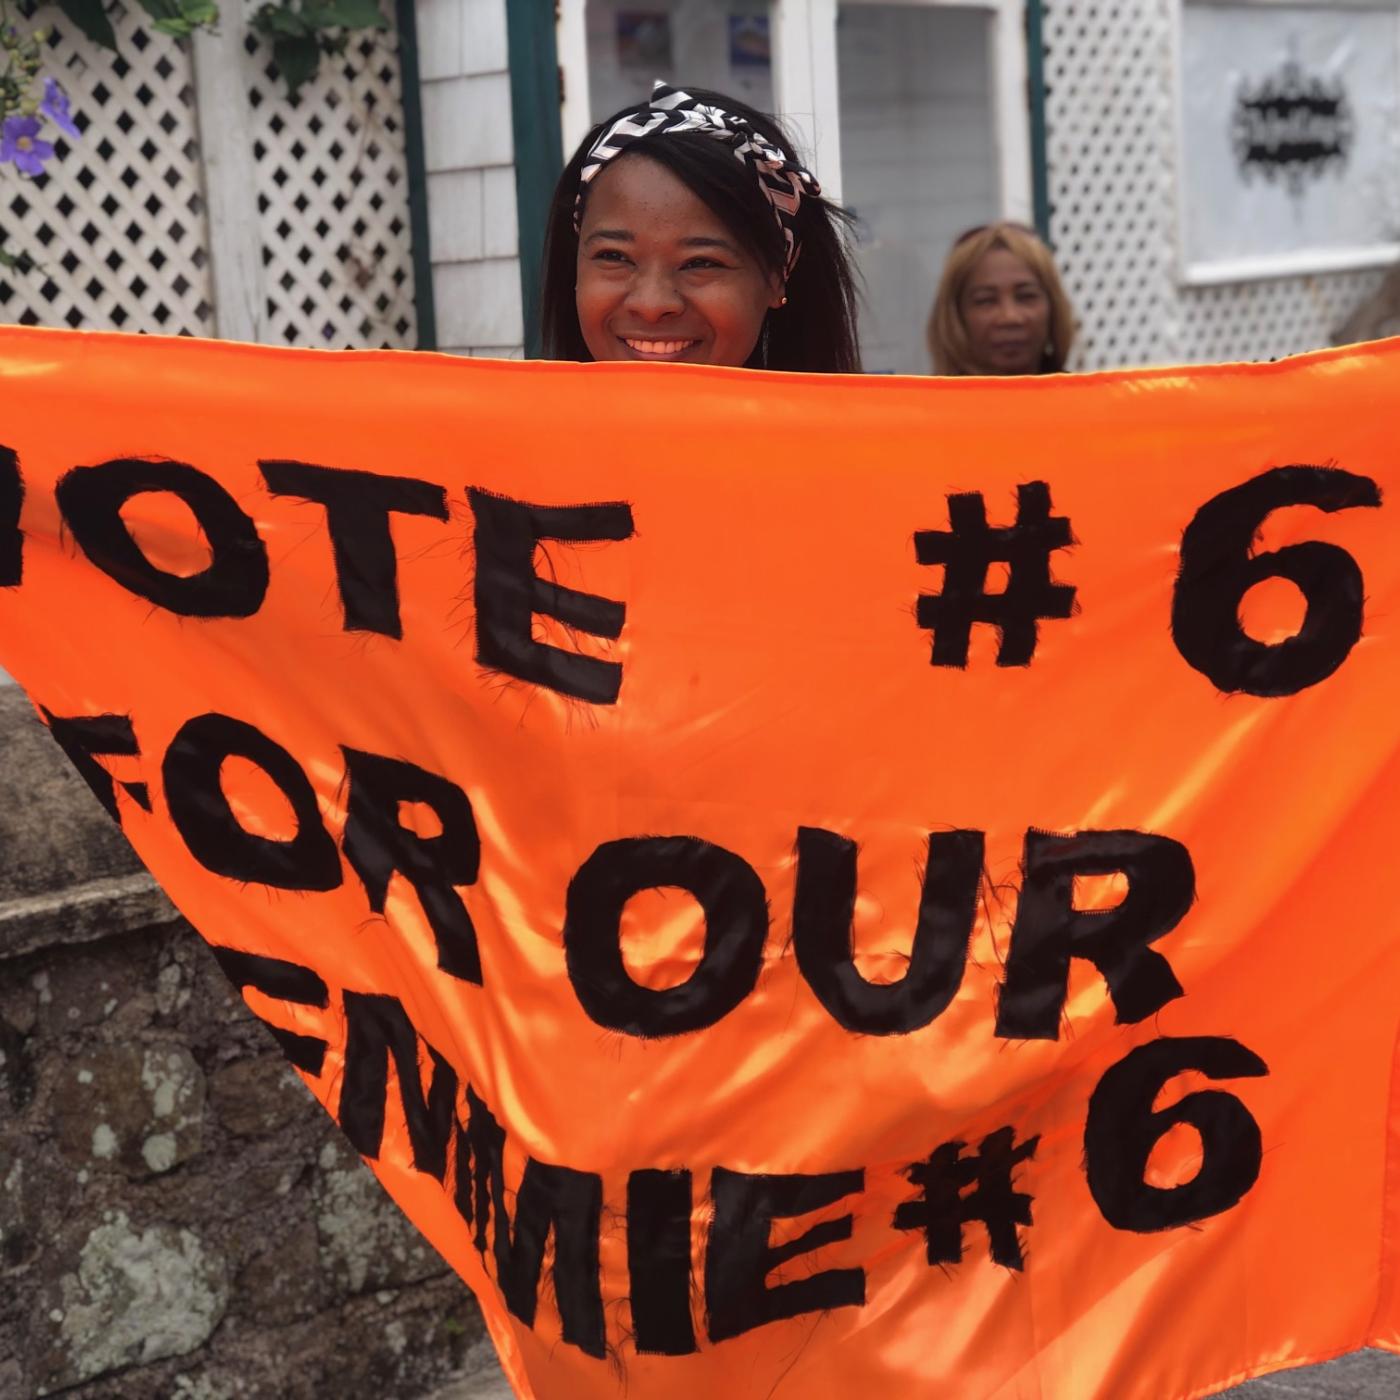 Saba citizen holds banner in support of a candidate